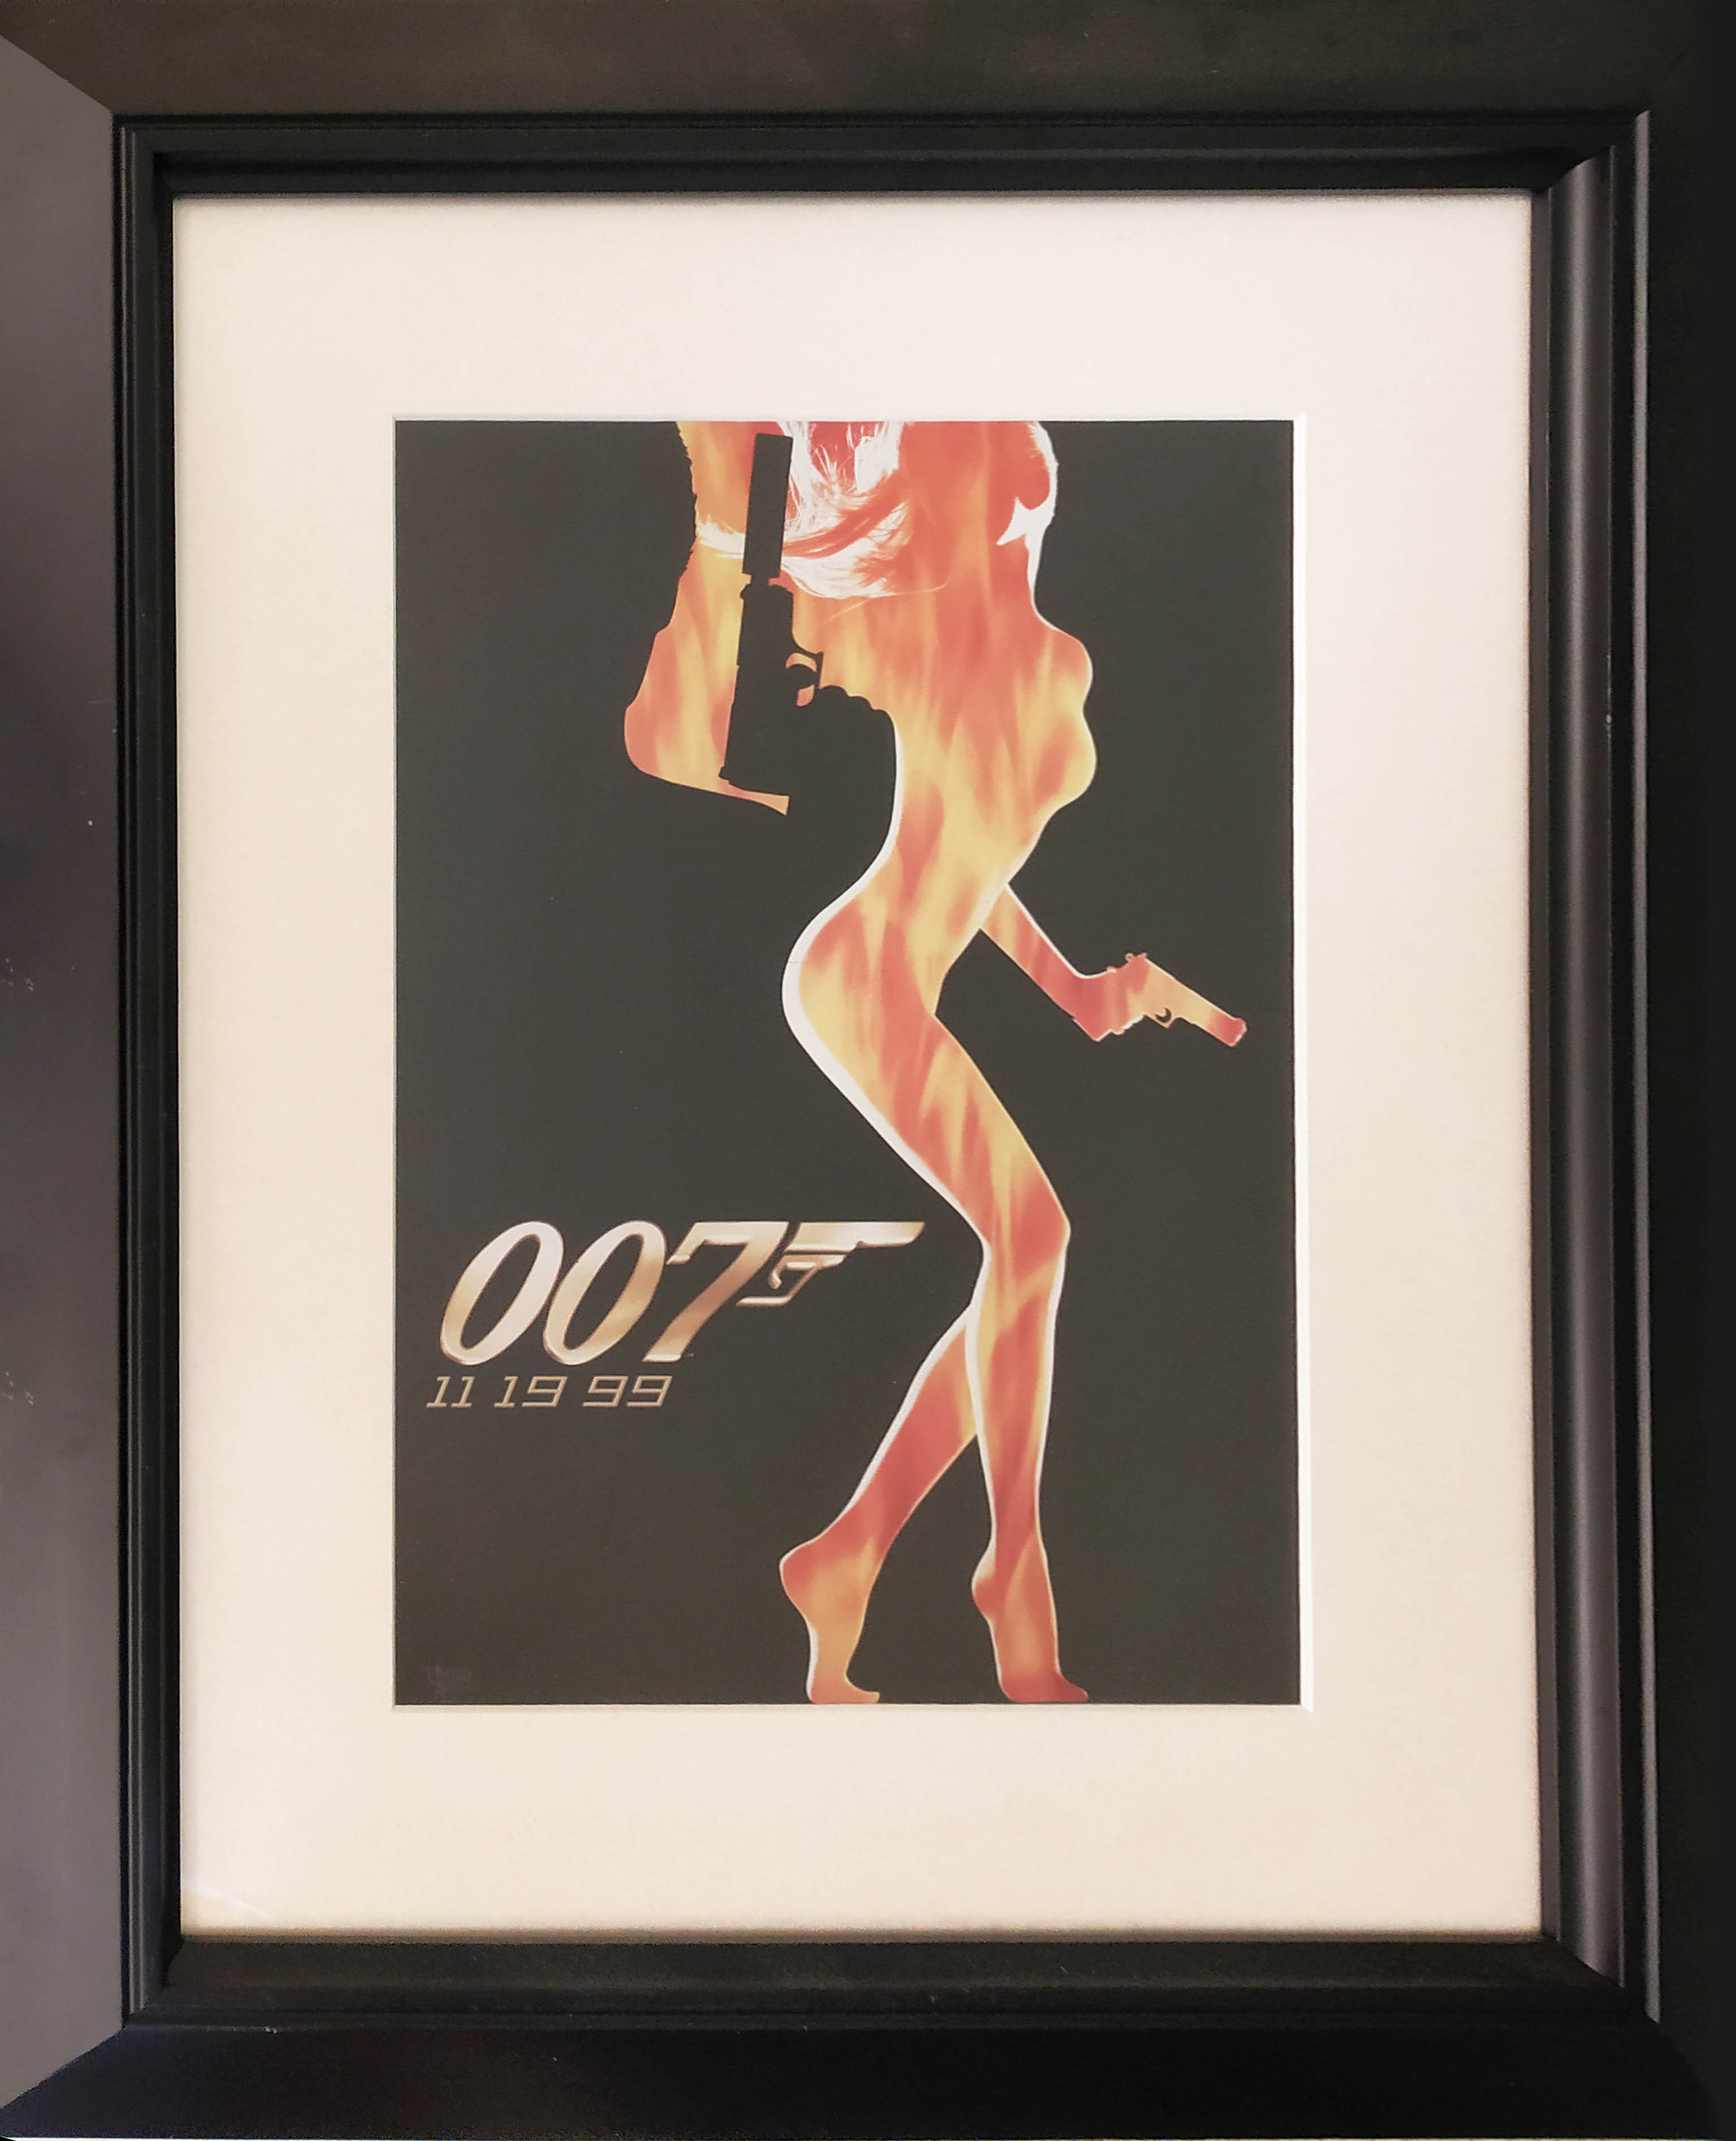 JAMES BOND, united artists MGM & Eon productions 'reproduction offset lithographic film posters', - Image 9 of 13